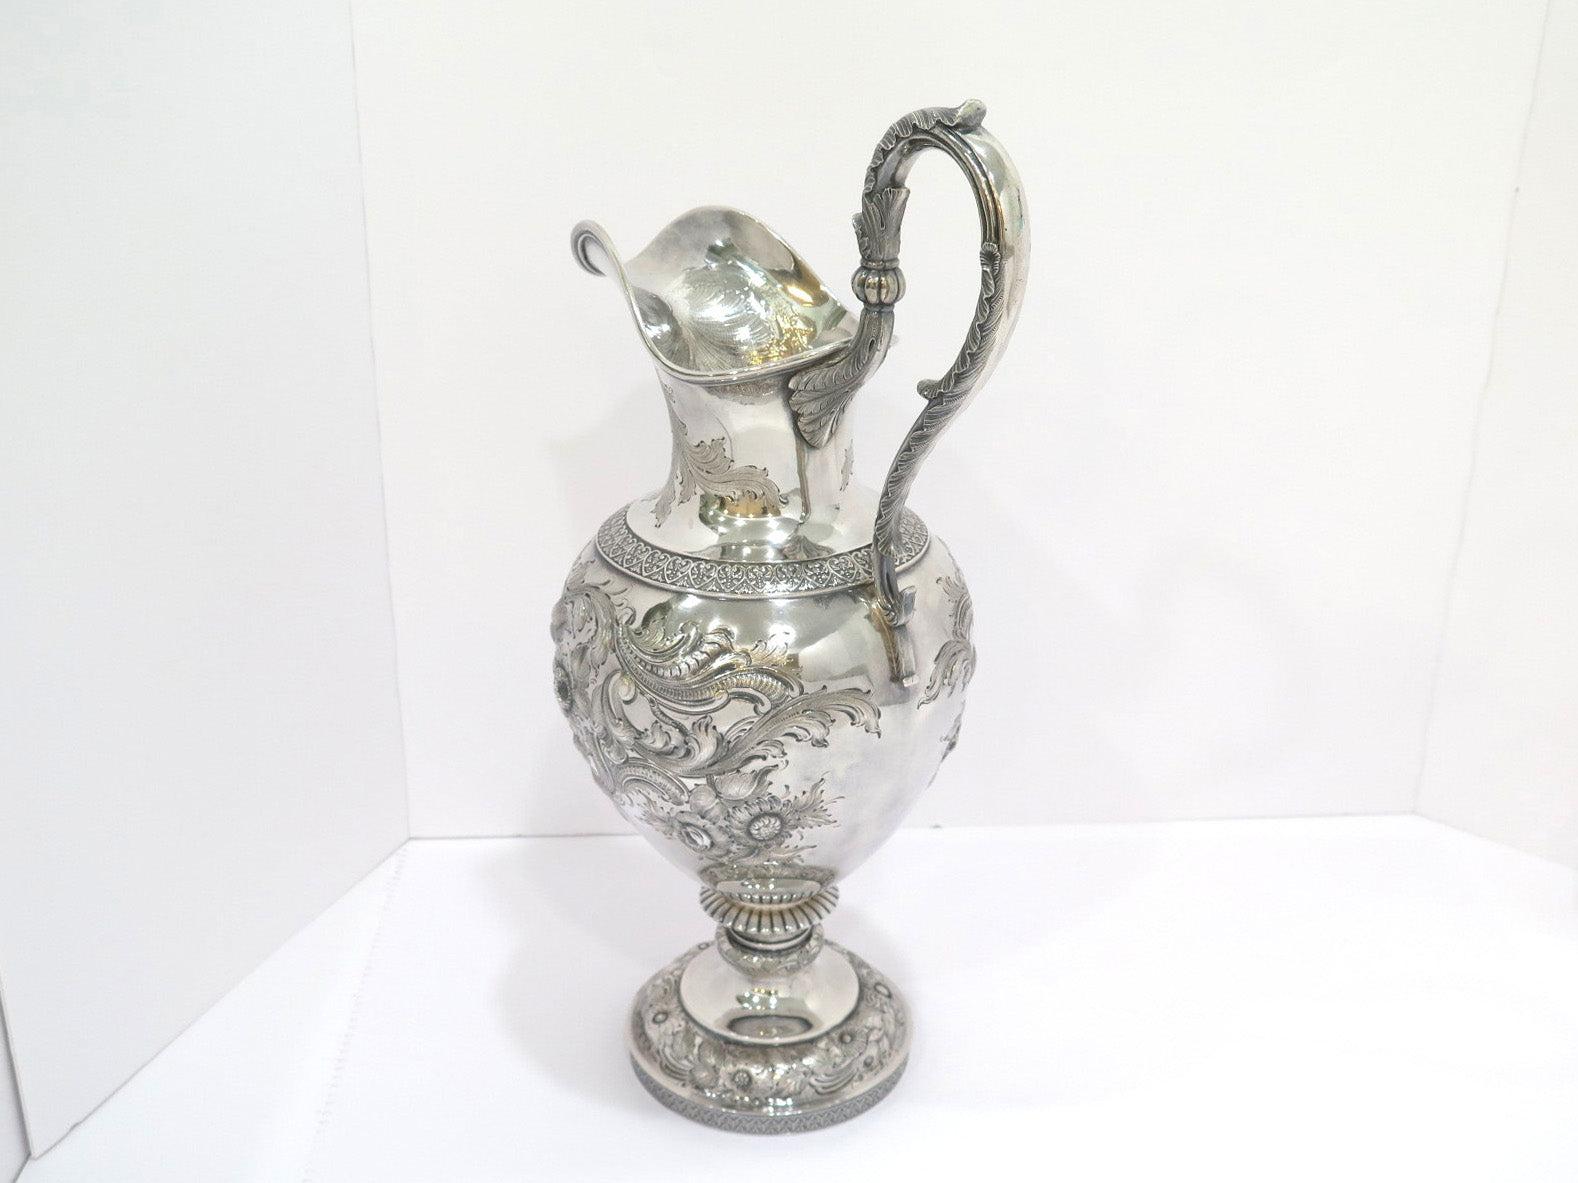 American 17.75 in - Coin Silver Ball, Tompkins & Black Antique 1839-1851 Repousse Pitcher For Sale